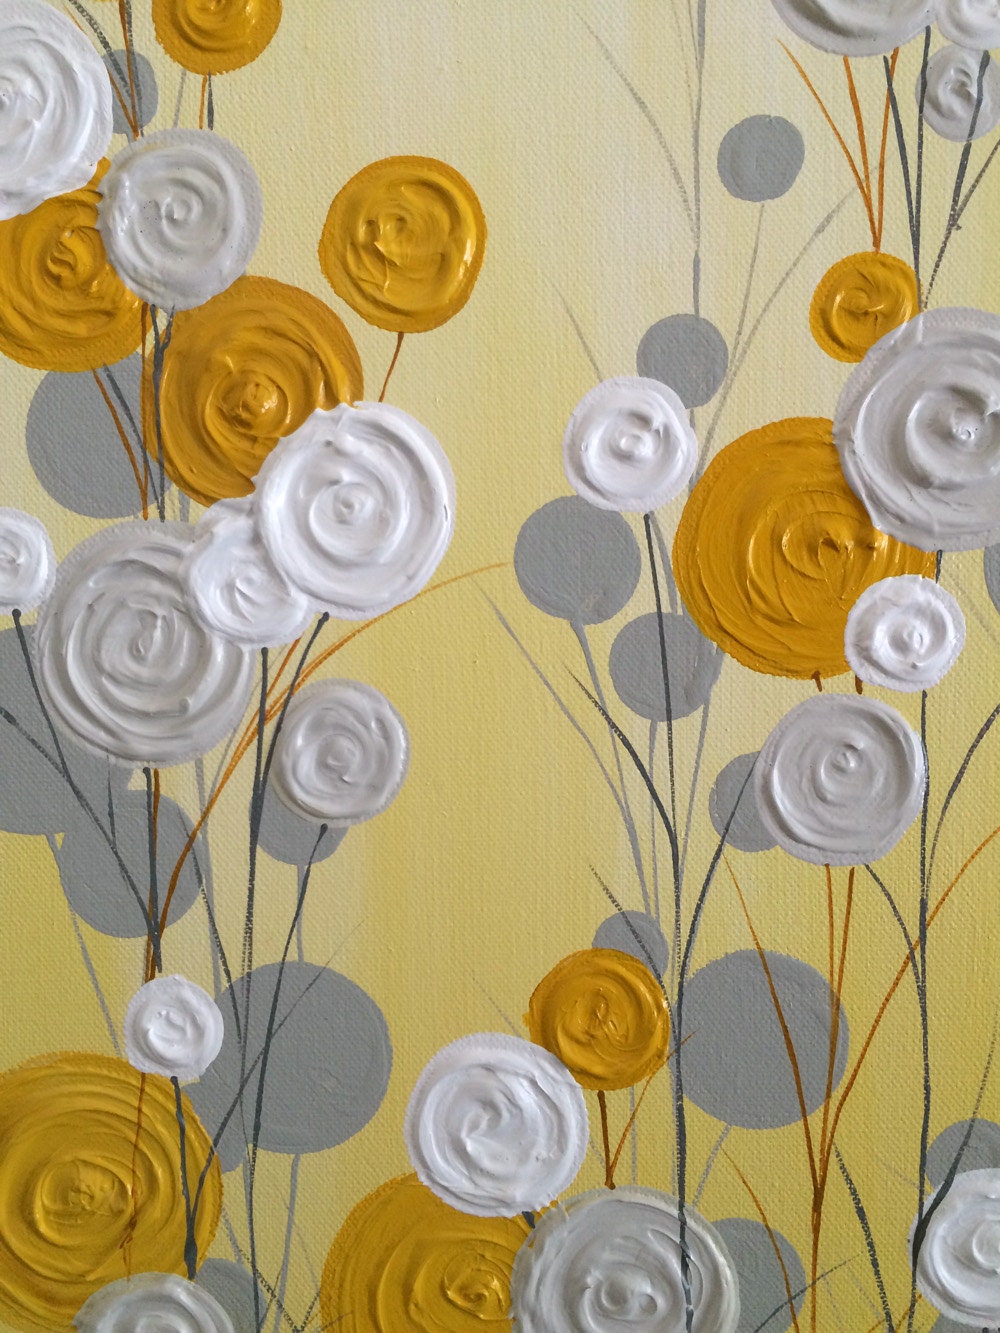 Mustard Yellow and Gray Abstract Flower Art Textured Acrylic